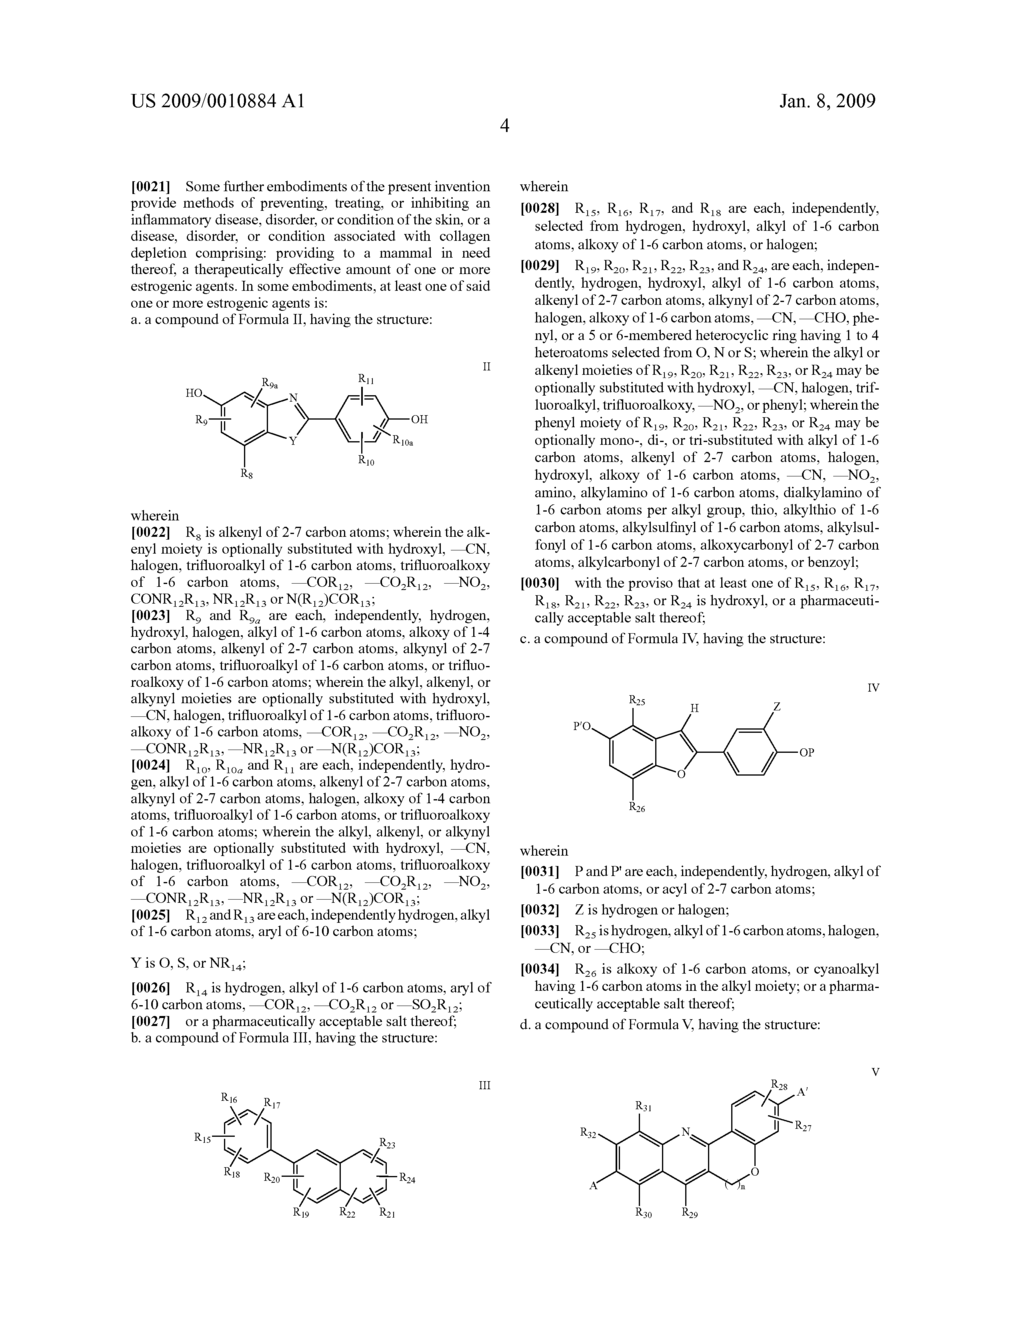 PHARMACEUTICAL COMPOSITIONS AND METHODS OF PREVENTING, TREATING, OR INHIBITING INFLAMMATORY DISEASES, DISORDERS, OR CONDITIONS OF THE SKIN, AND DISEASES, DISORDERS, OR CONDITIONS ASSOCIATED WITH COLLAGEN DEPLETION - diagram, schematic, and image 28